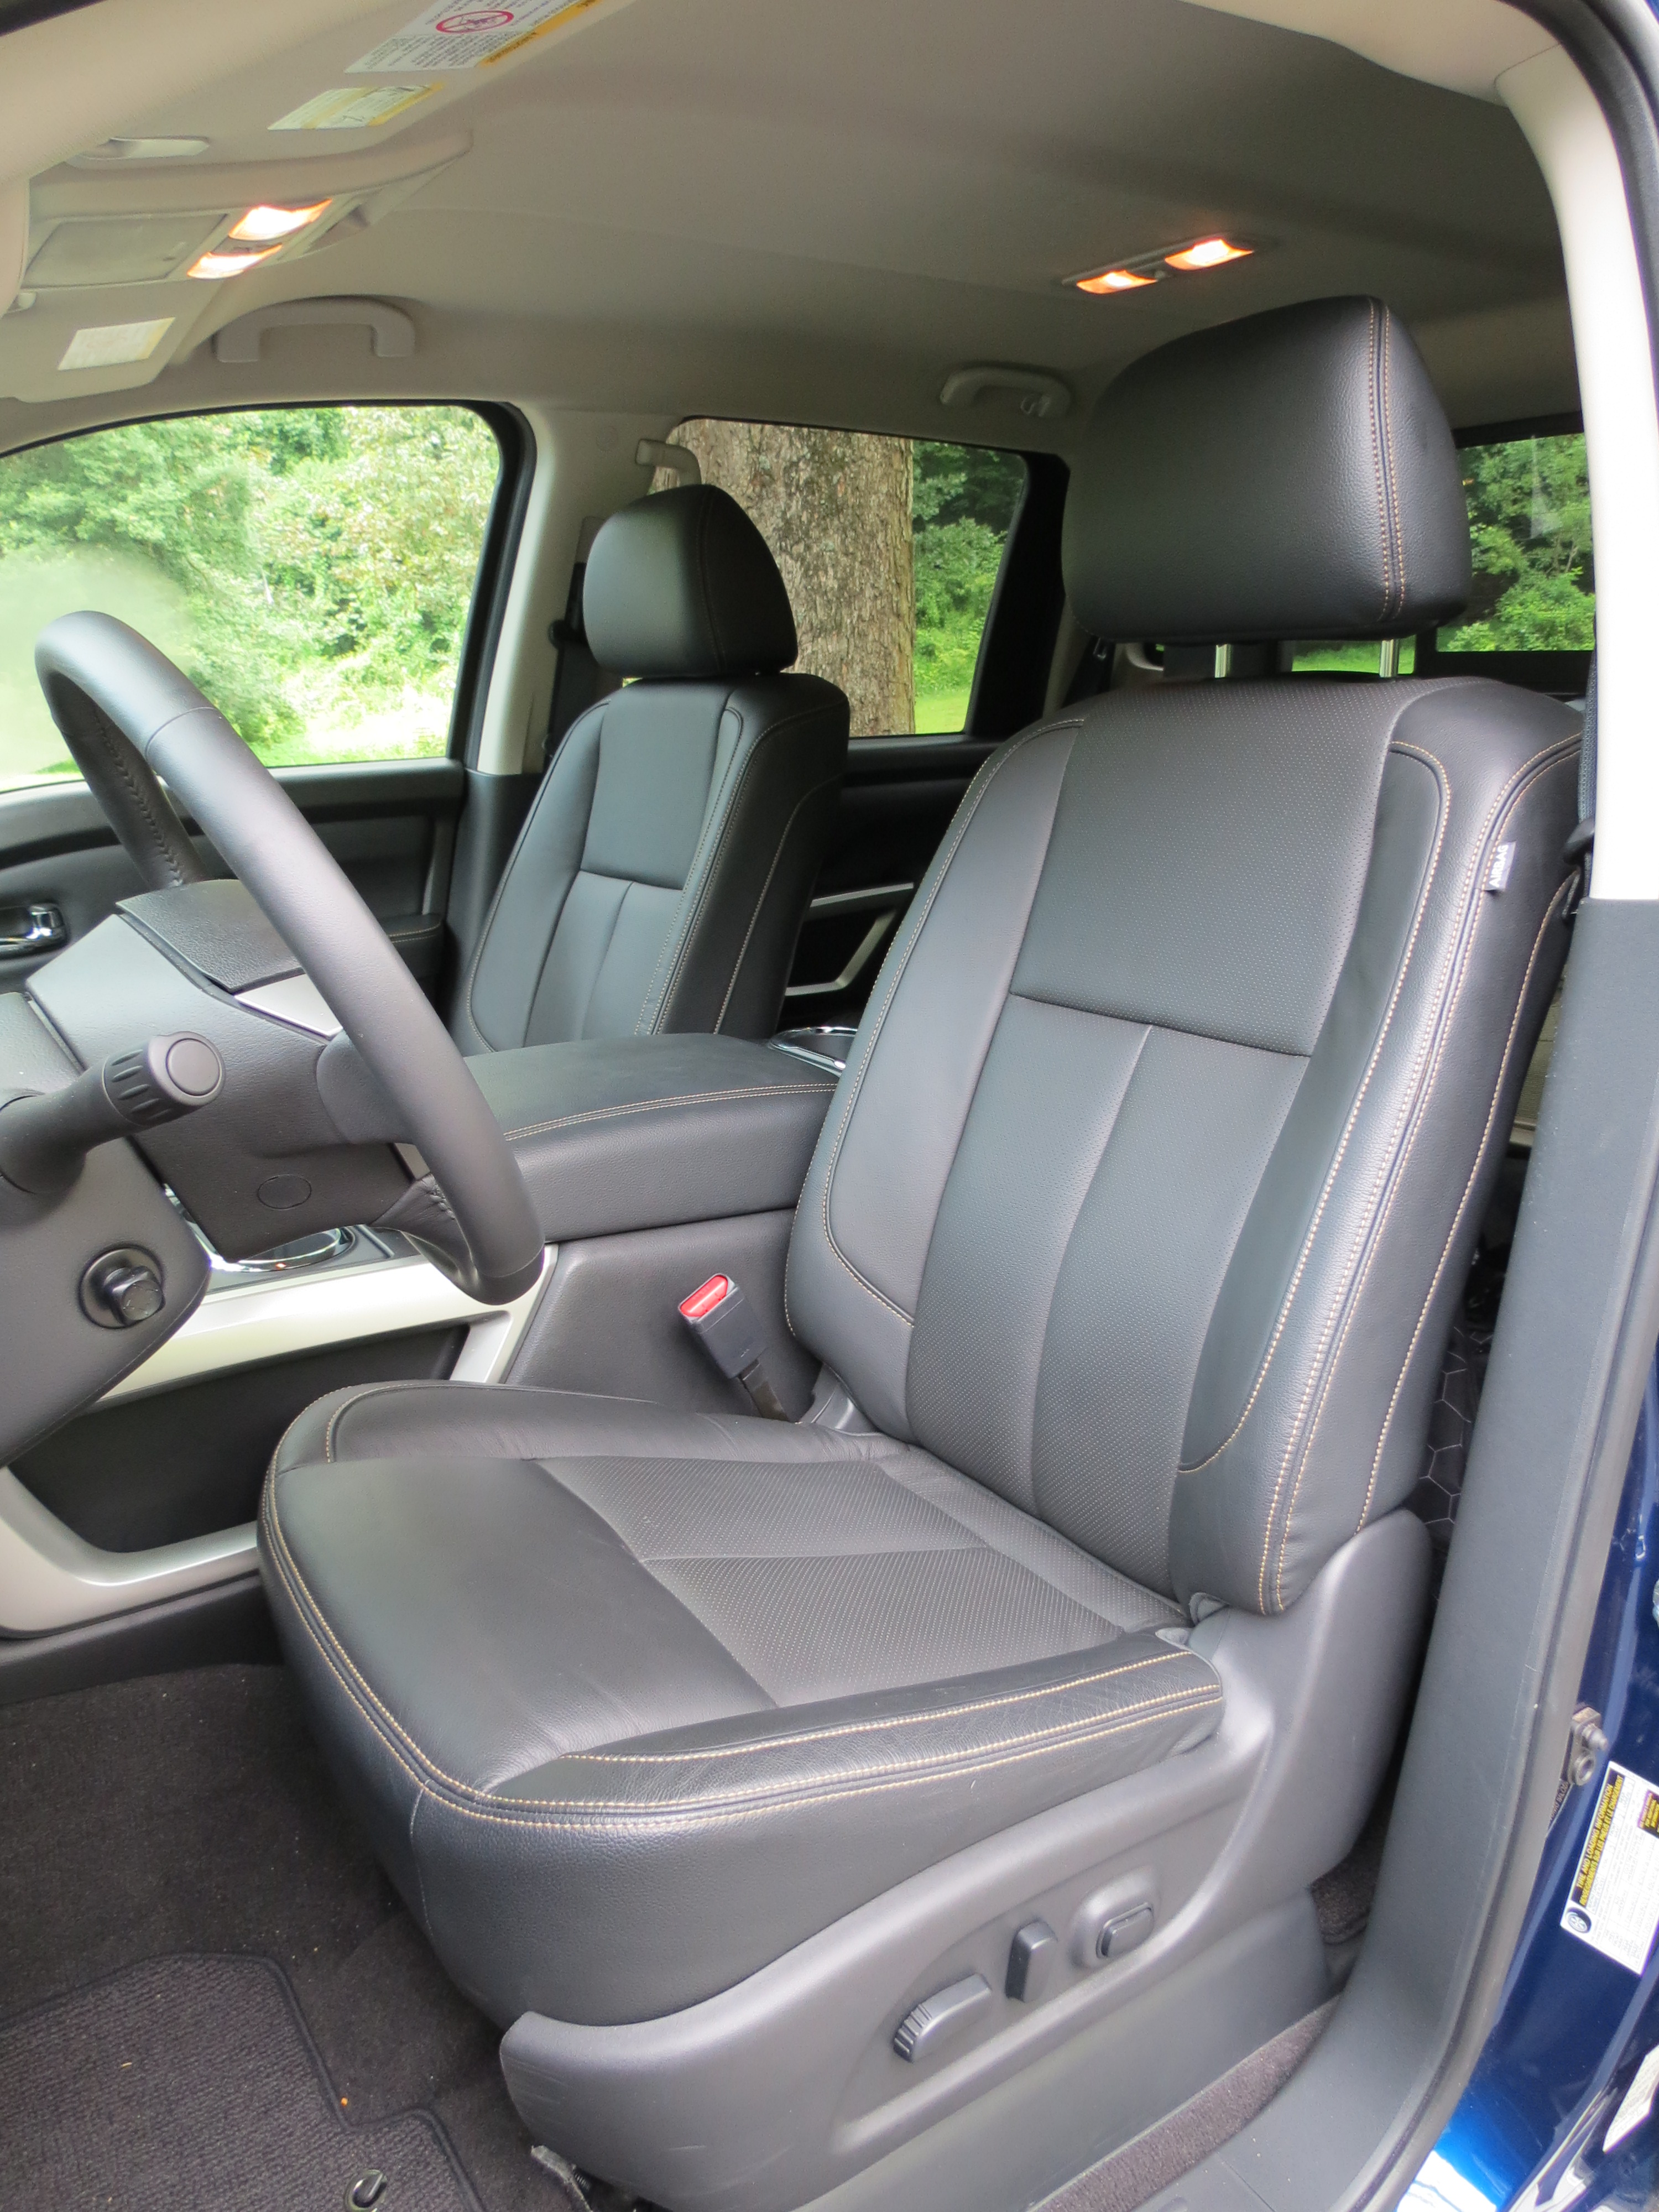 The Nissan Titan XD features Leather Captain's Chairs w/heated seats. 8-Way Powerd Driver Seat w/ Adjustable Lumbar, and 4-Way Power Passenger Seat.